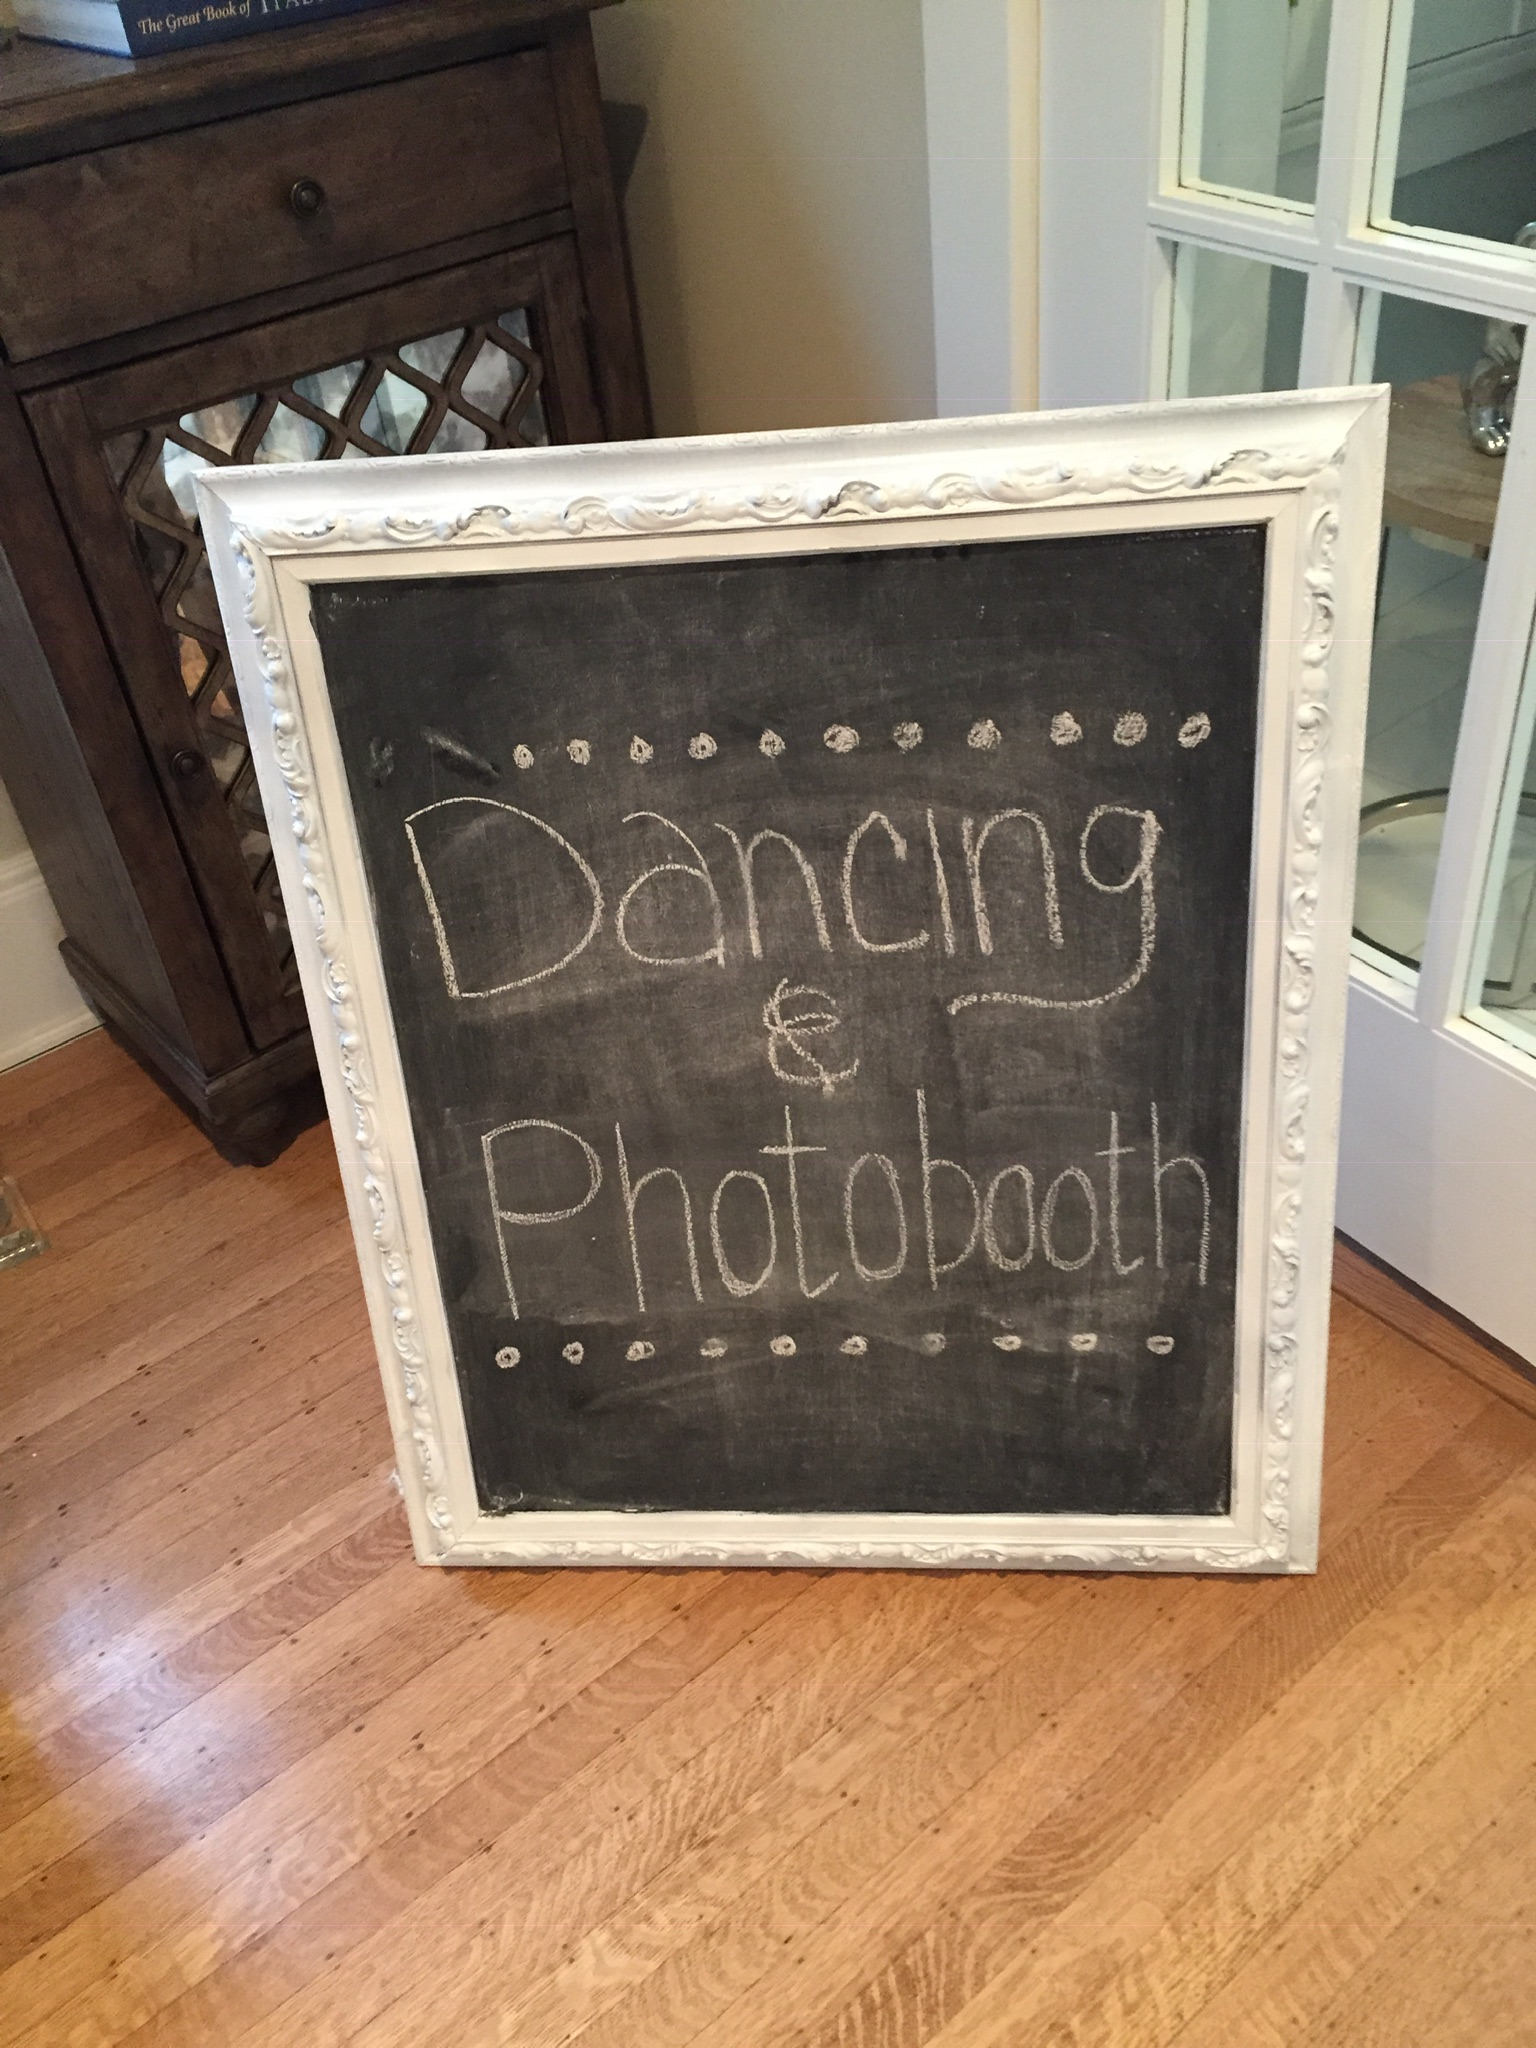 Chalkboard to point out dancing and photo booth